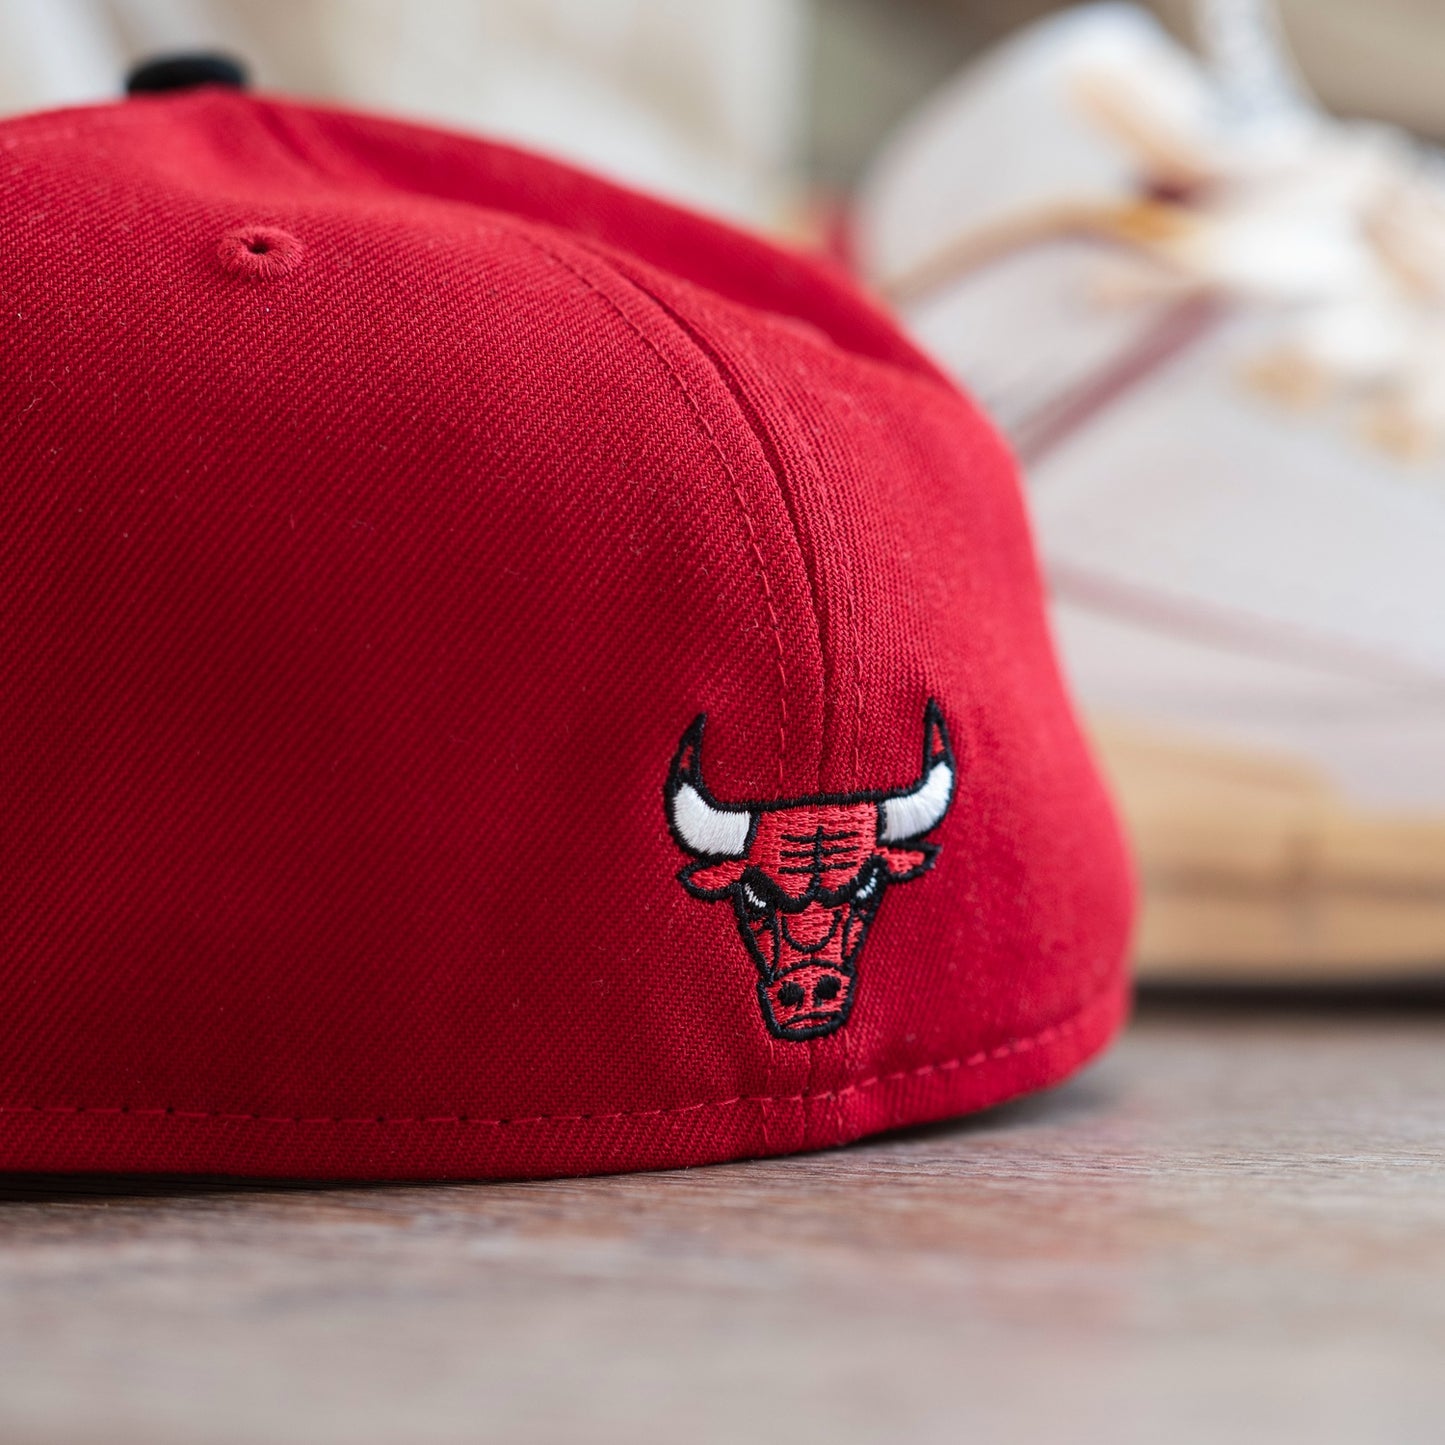 NEW ERA 59FIFTY NBA CHICAGO BULLS TWO TONE / GREY UV FITTED CAP